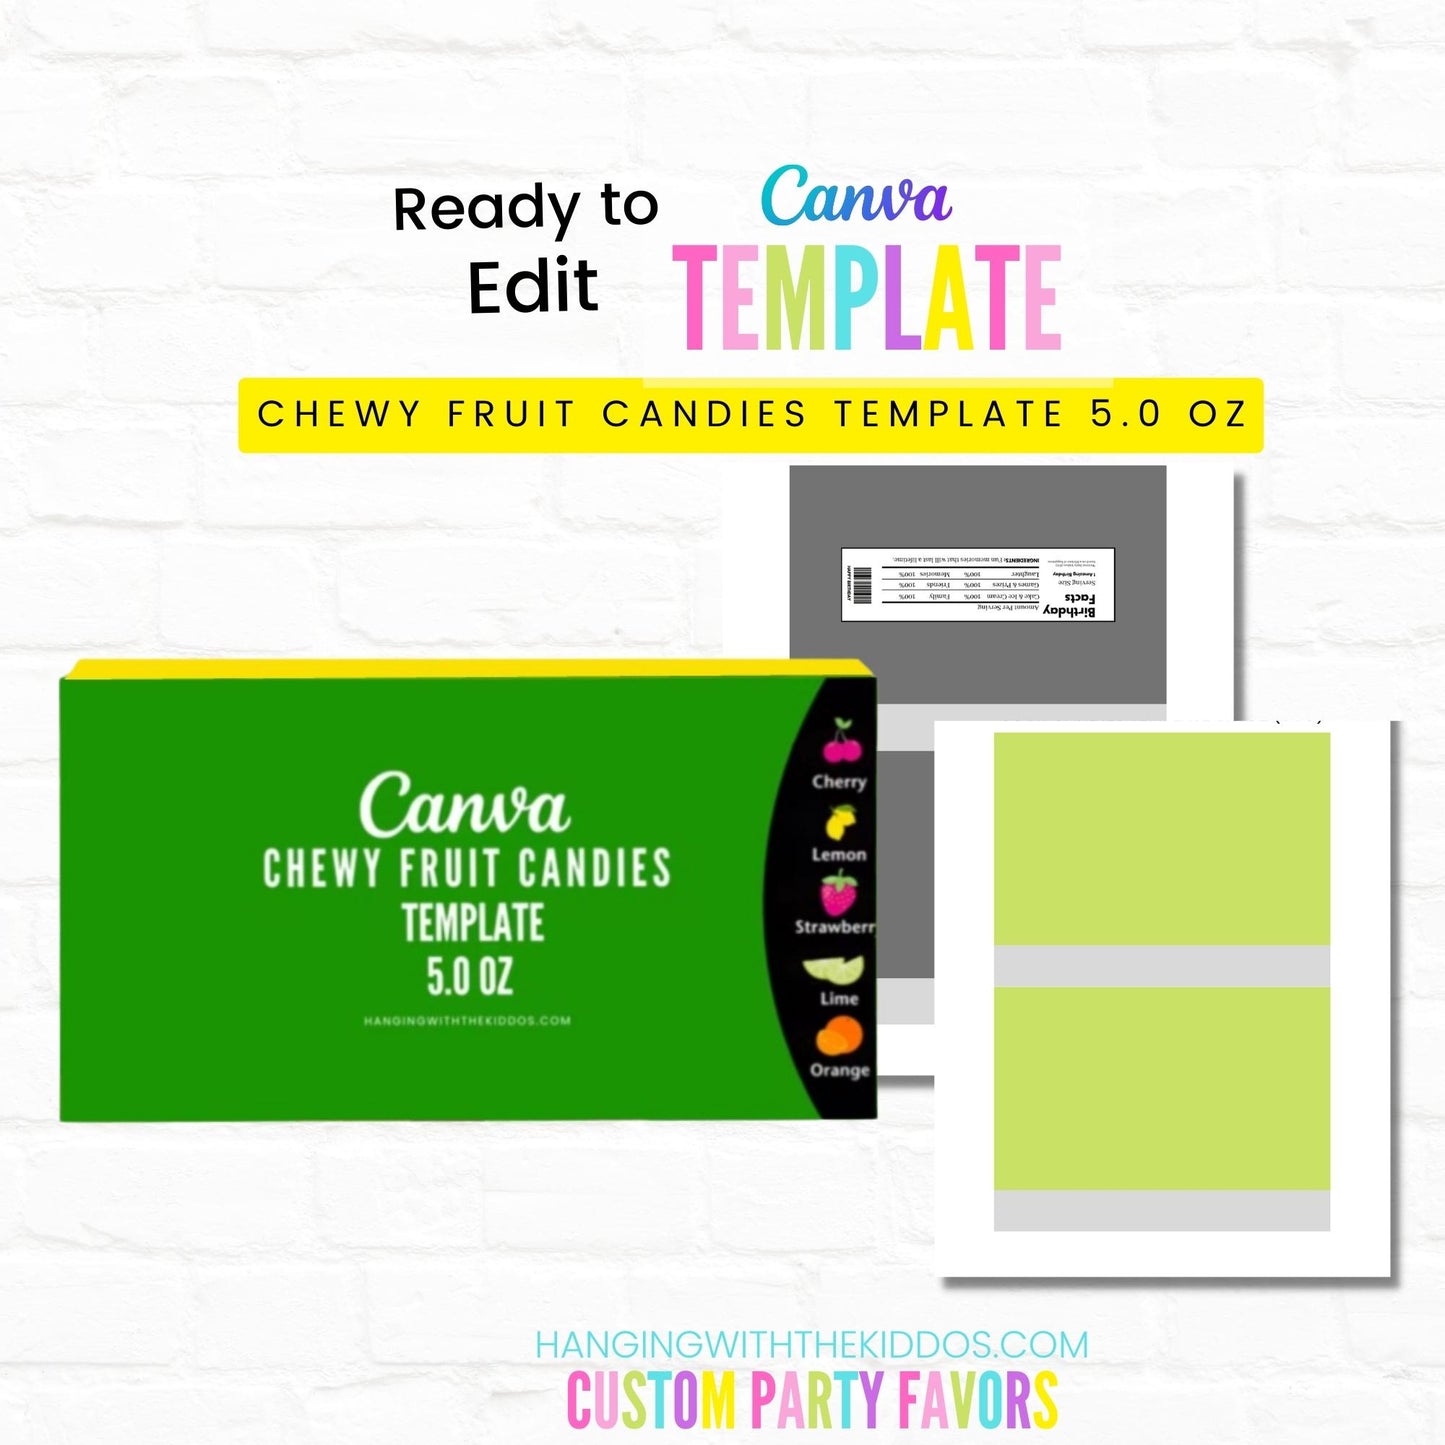 Chewy Fruit Candy Box Template|5oz